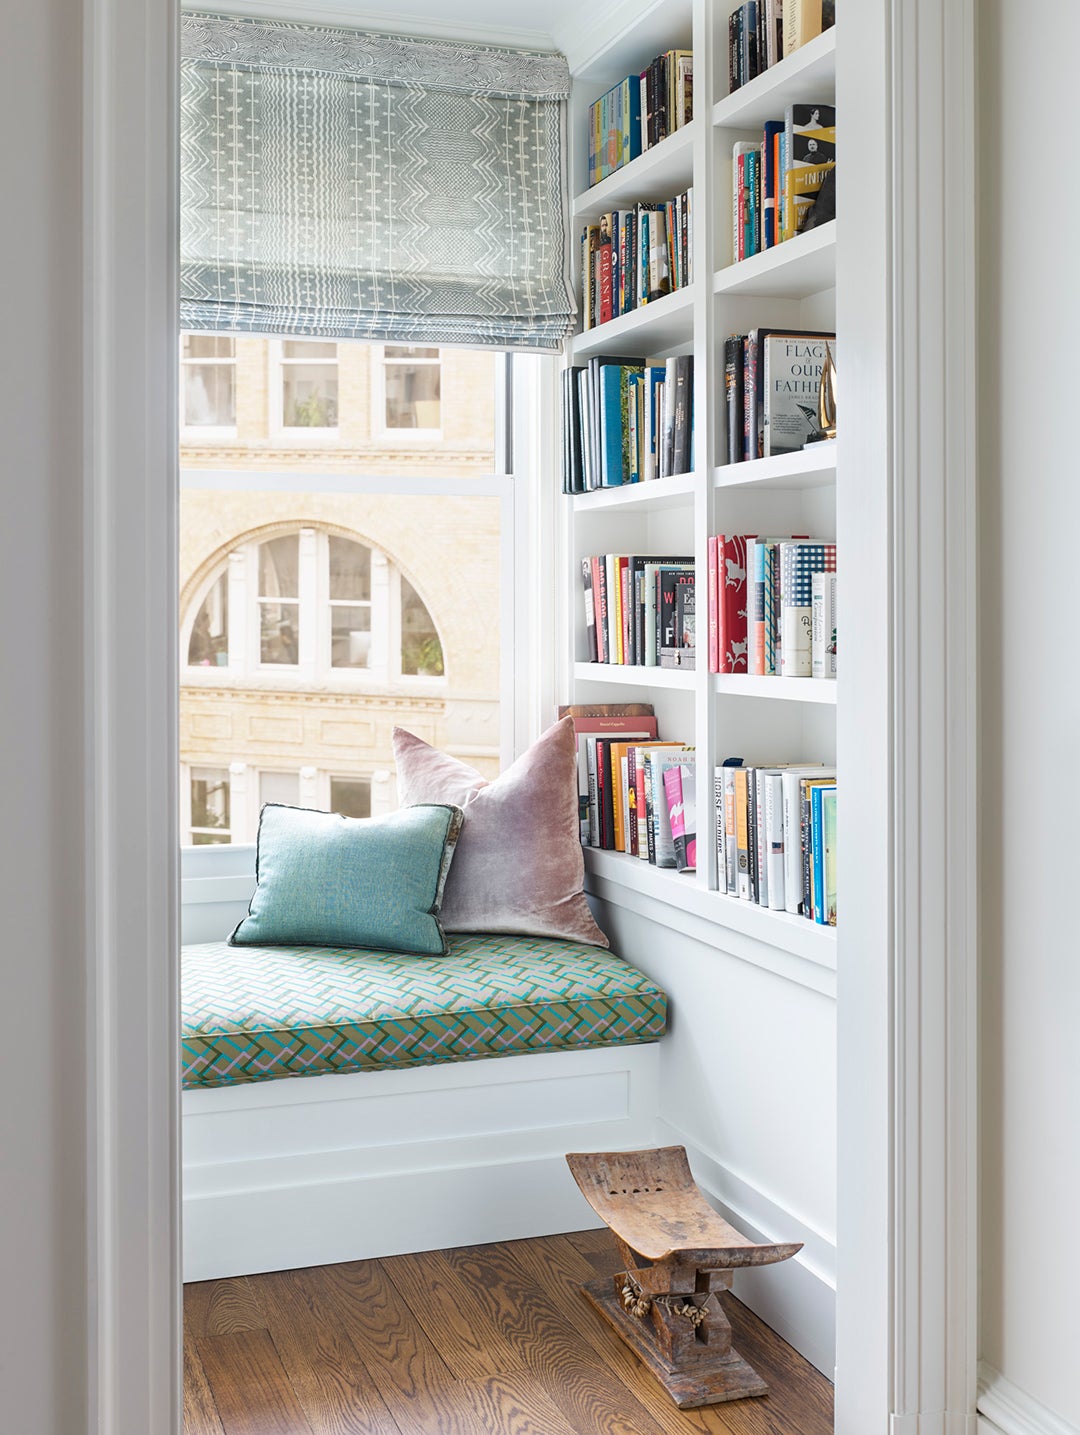 reading nook by window